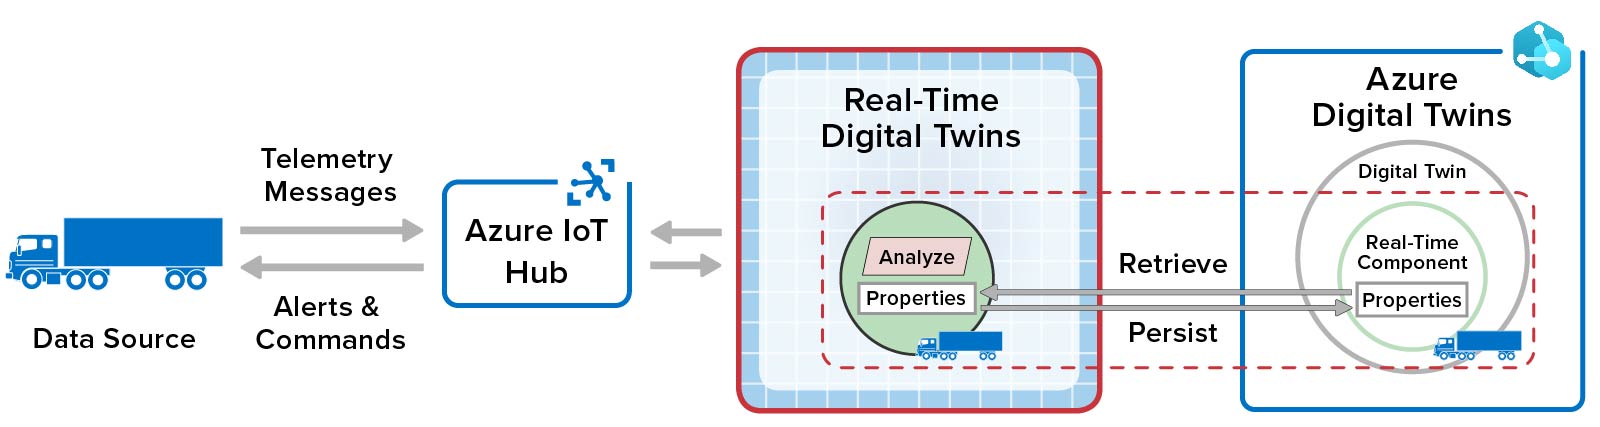 Telematics application using real-time analytics with Azure Digital Twins